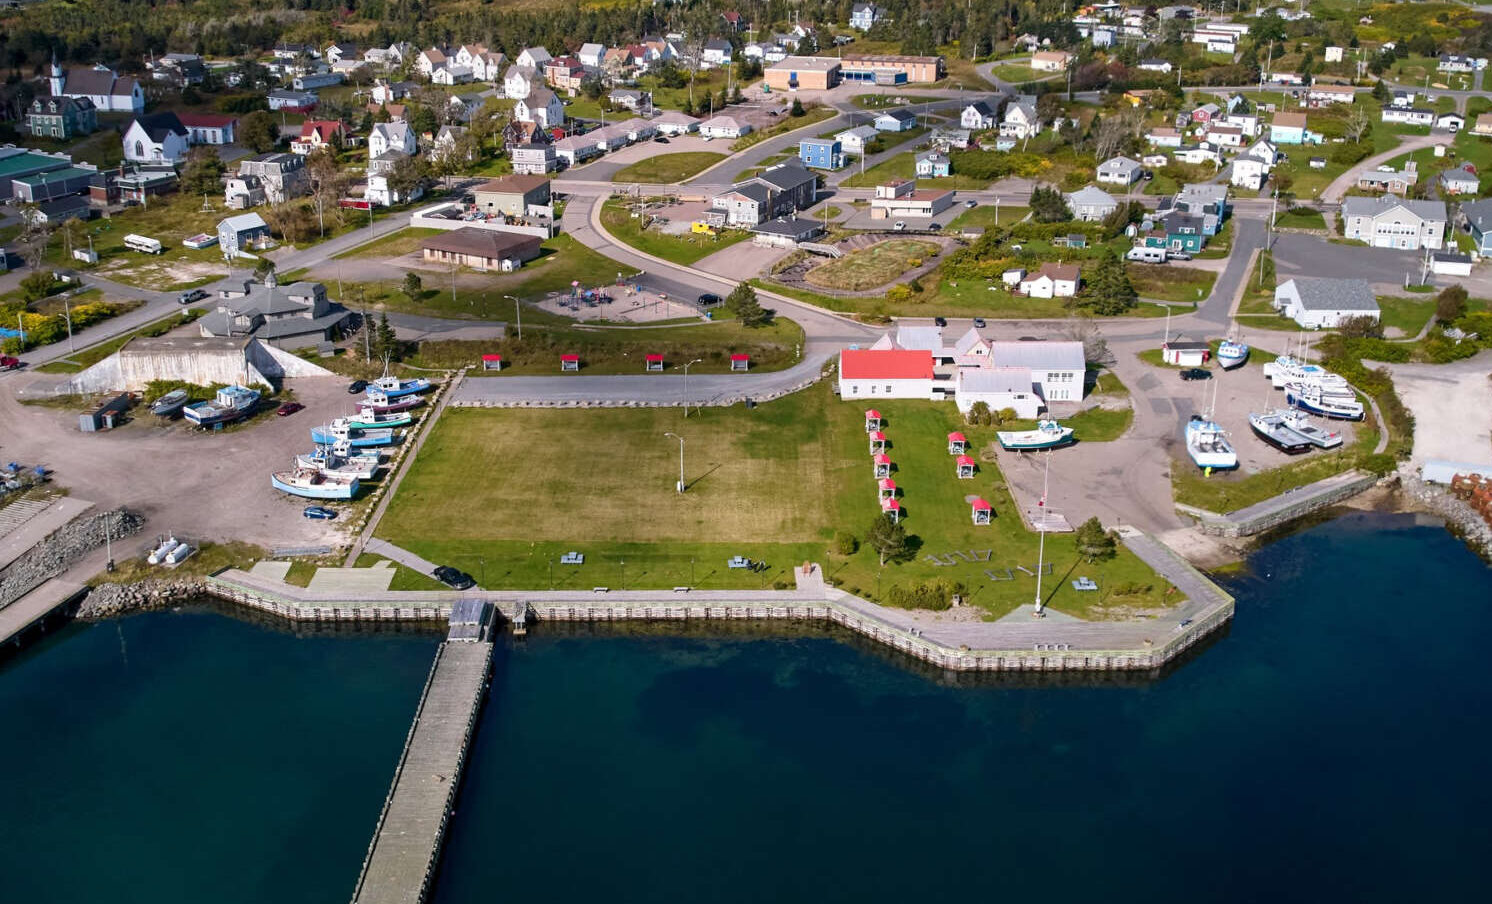 Aerial photo of town and waterfront with wharf and large grassy area